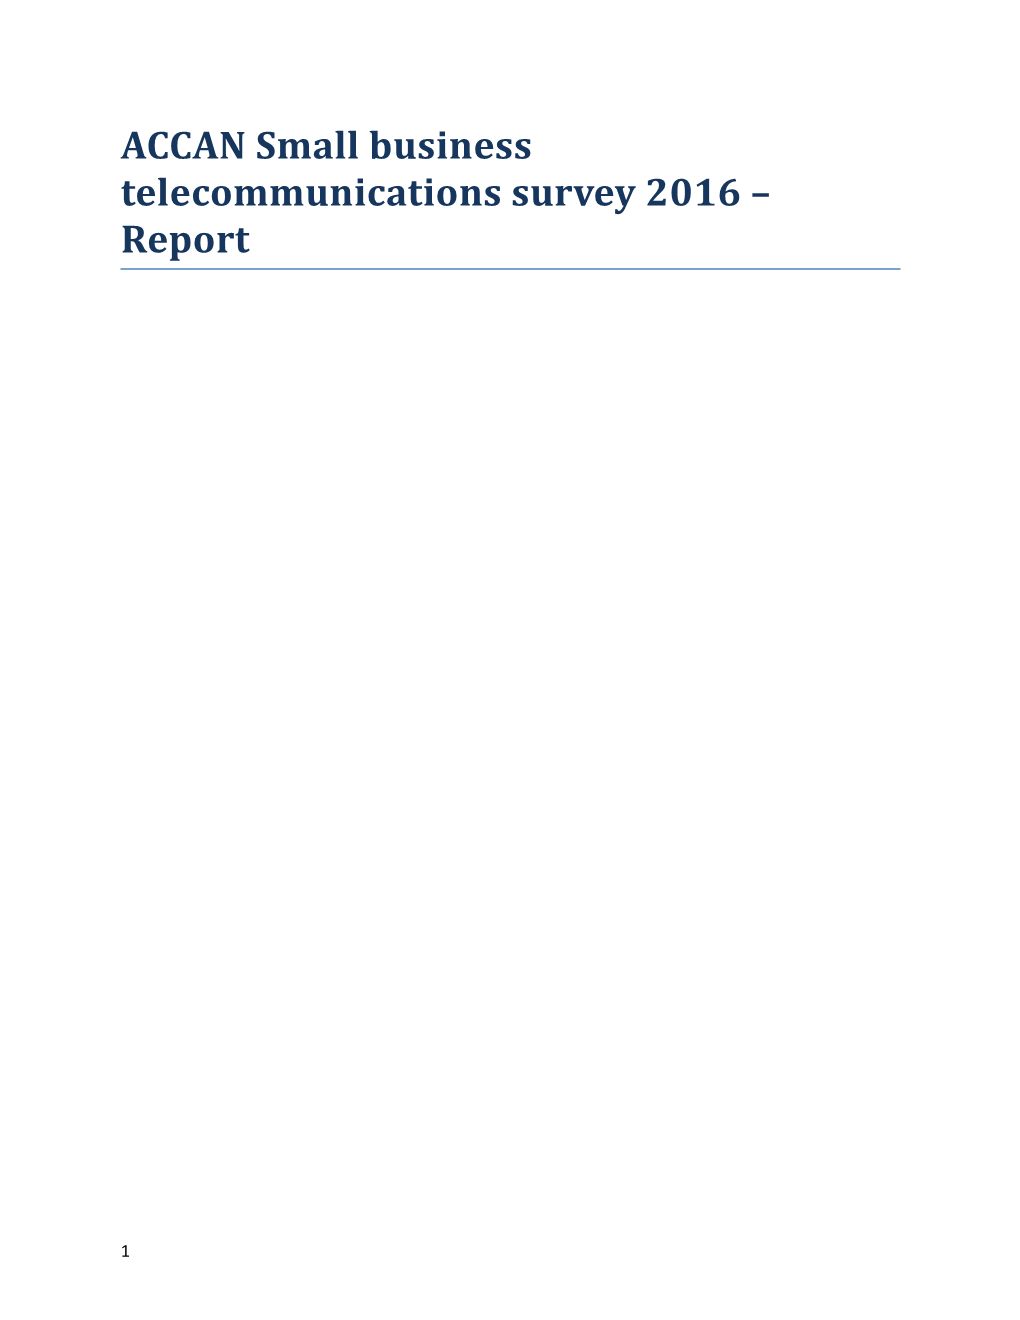 ACCAN Small Business Telecommunications Survey 2016 Report